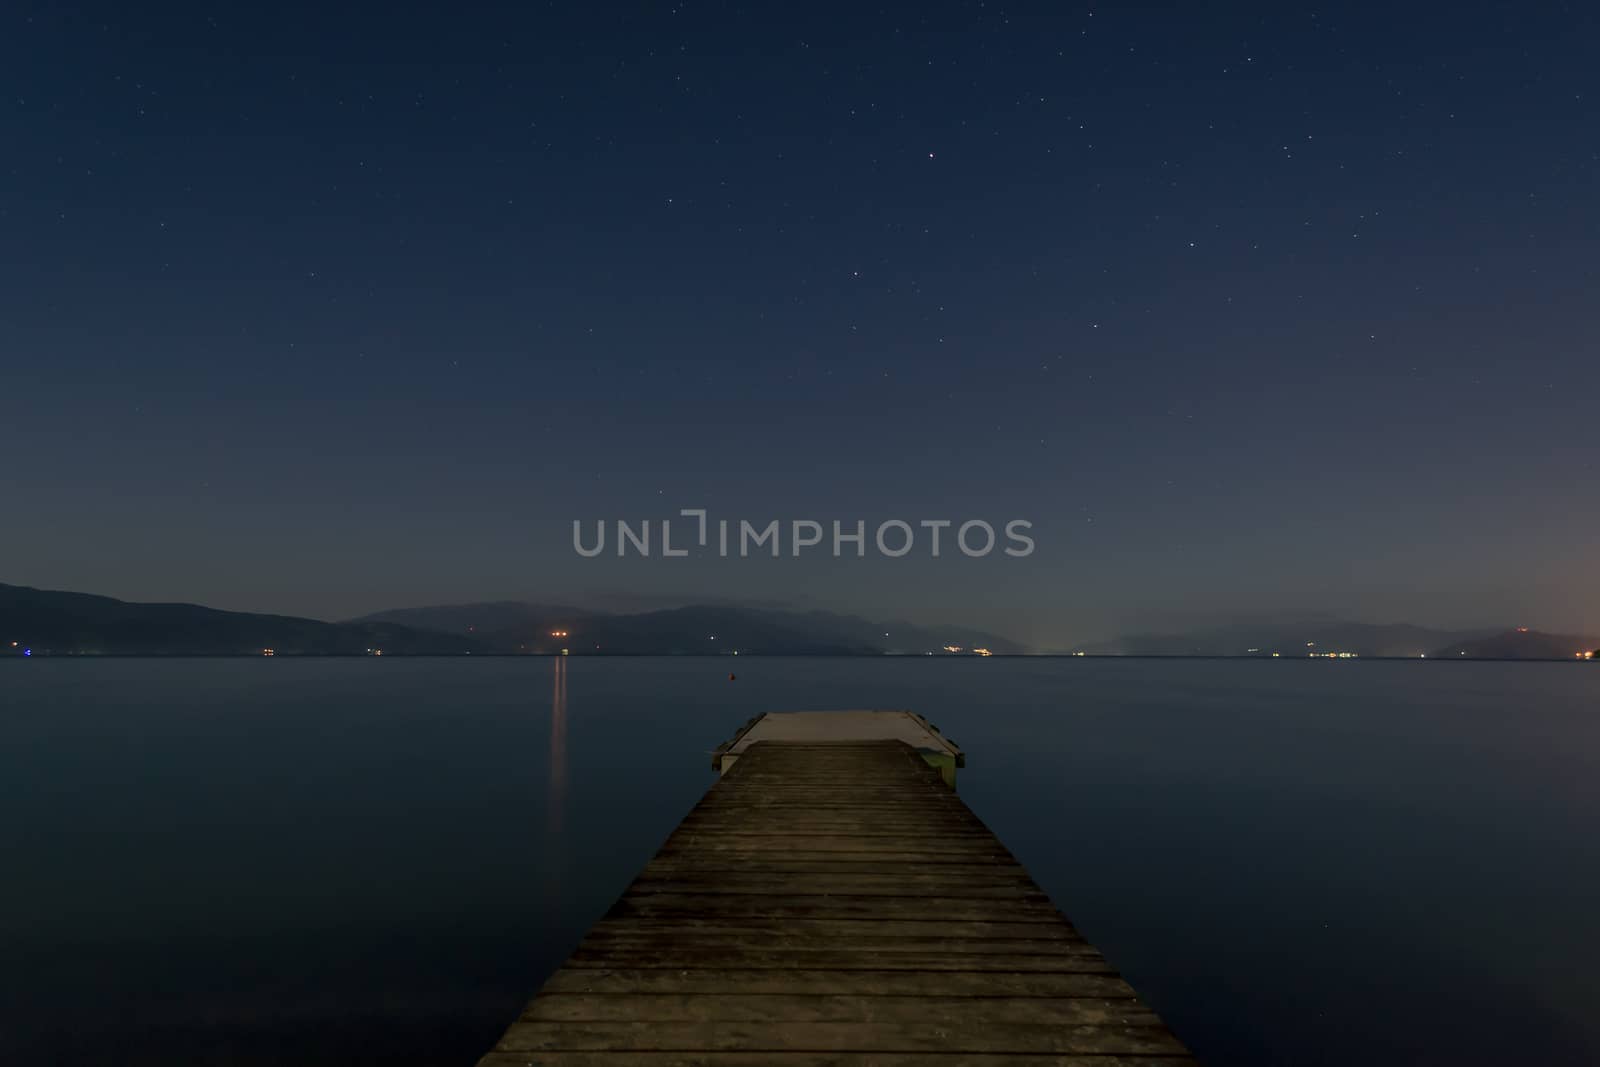 Night on the peaceful lake, a milion stars view, and the dock to stand up and be happy to be there.